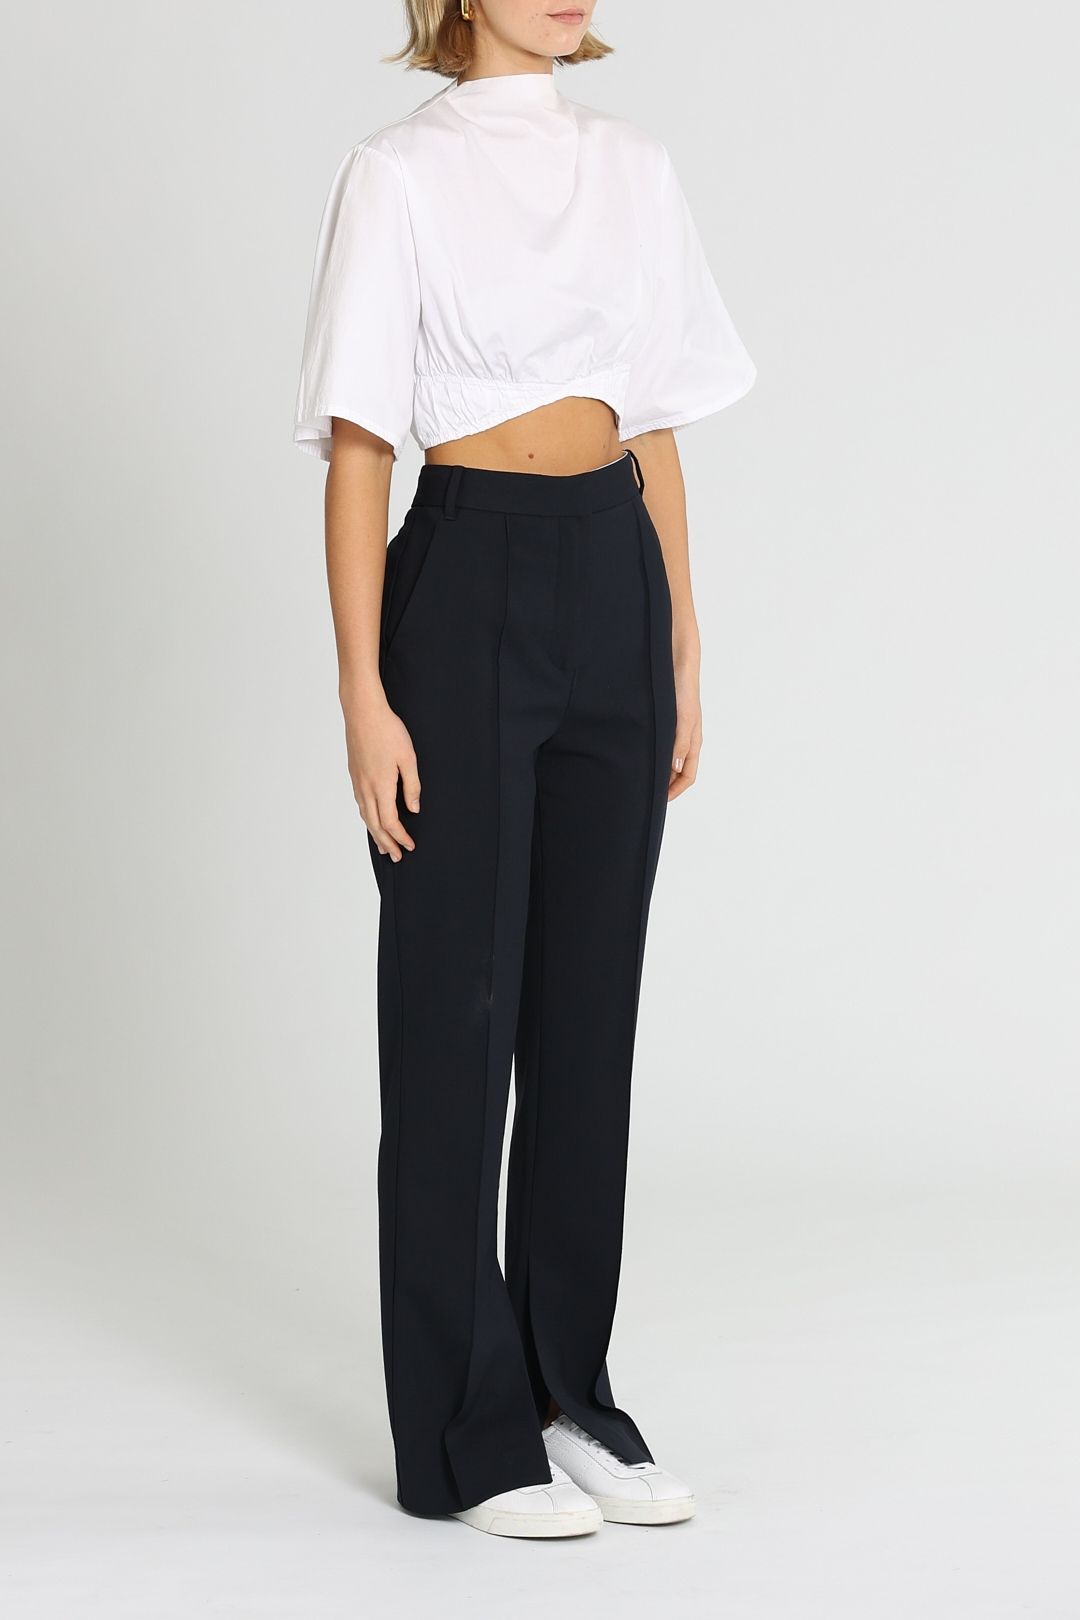 Camilla and Marc Abel Tailored Pant Fitted